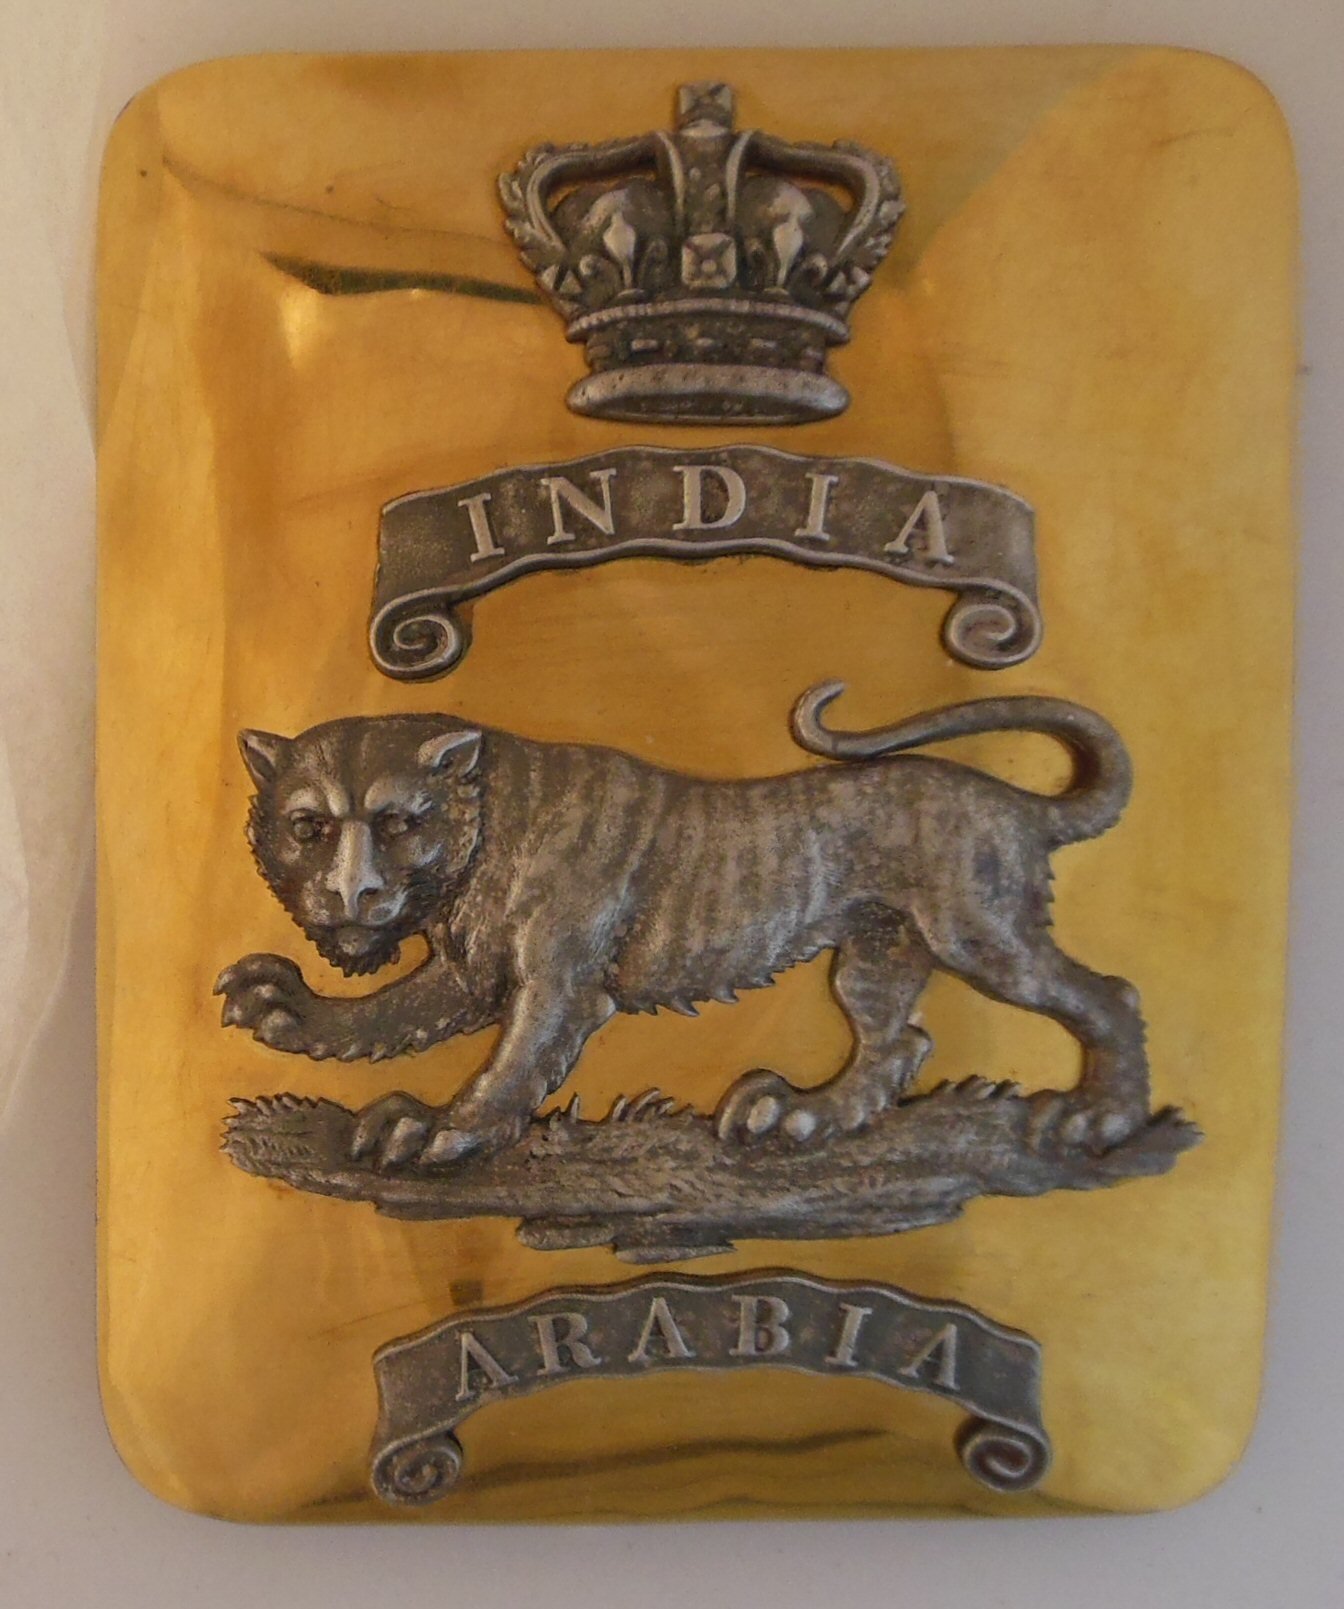 65th of Foot Shoulder Belt Plate worn 1830 to 1855